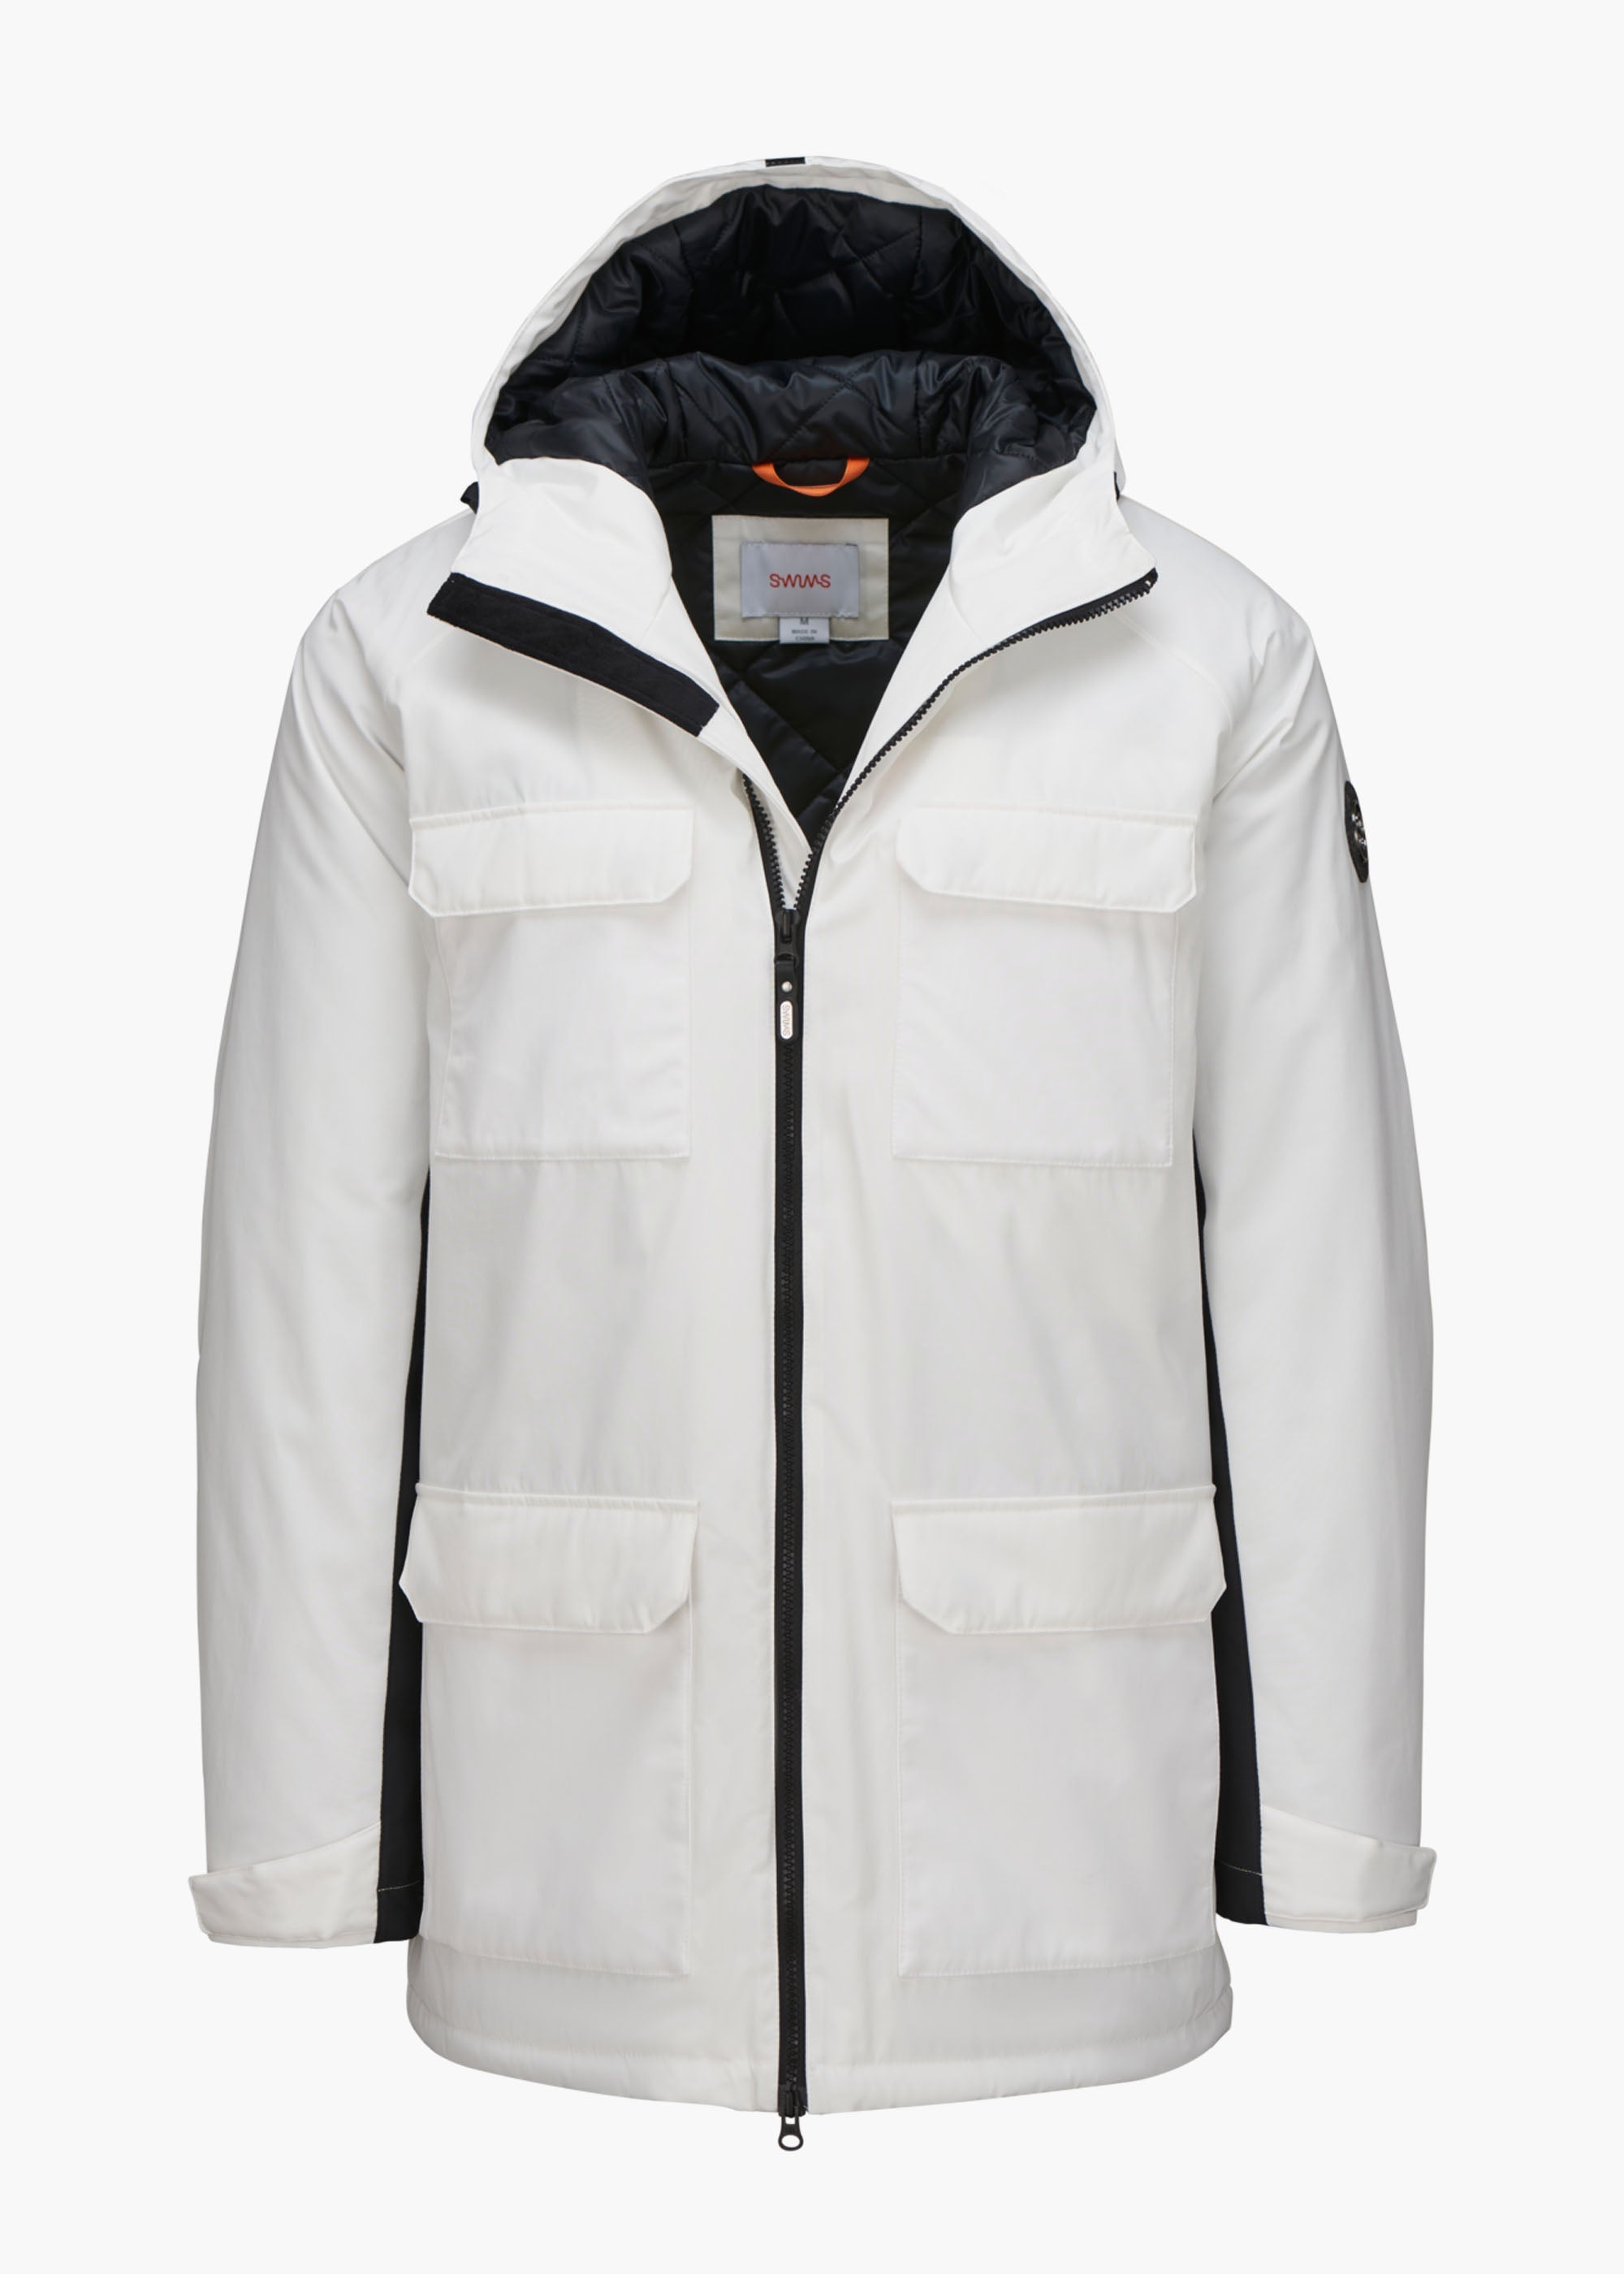 Laax Jacket in White for Mens | SWIMS | SWIMS